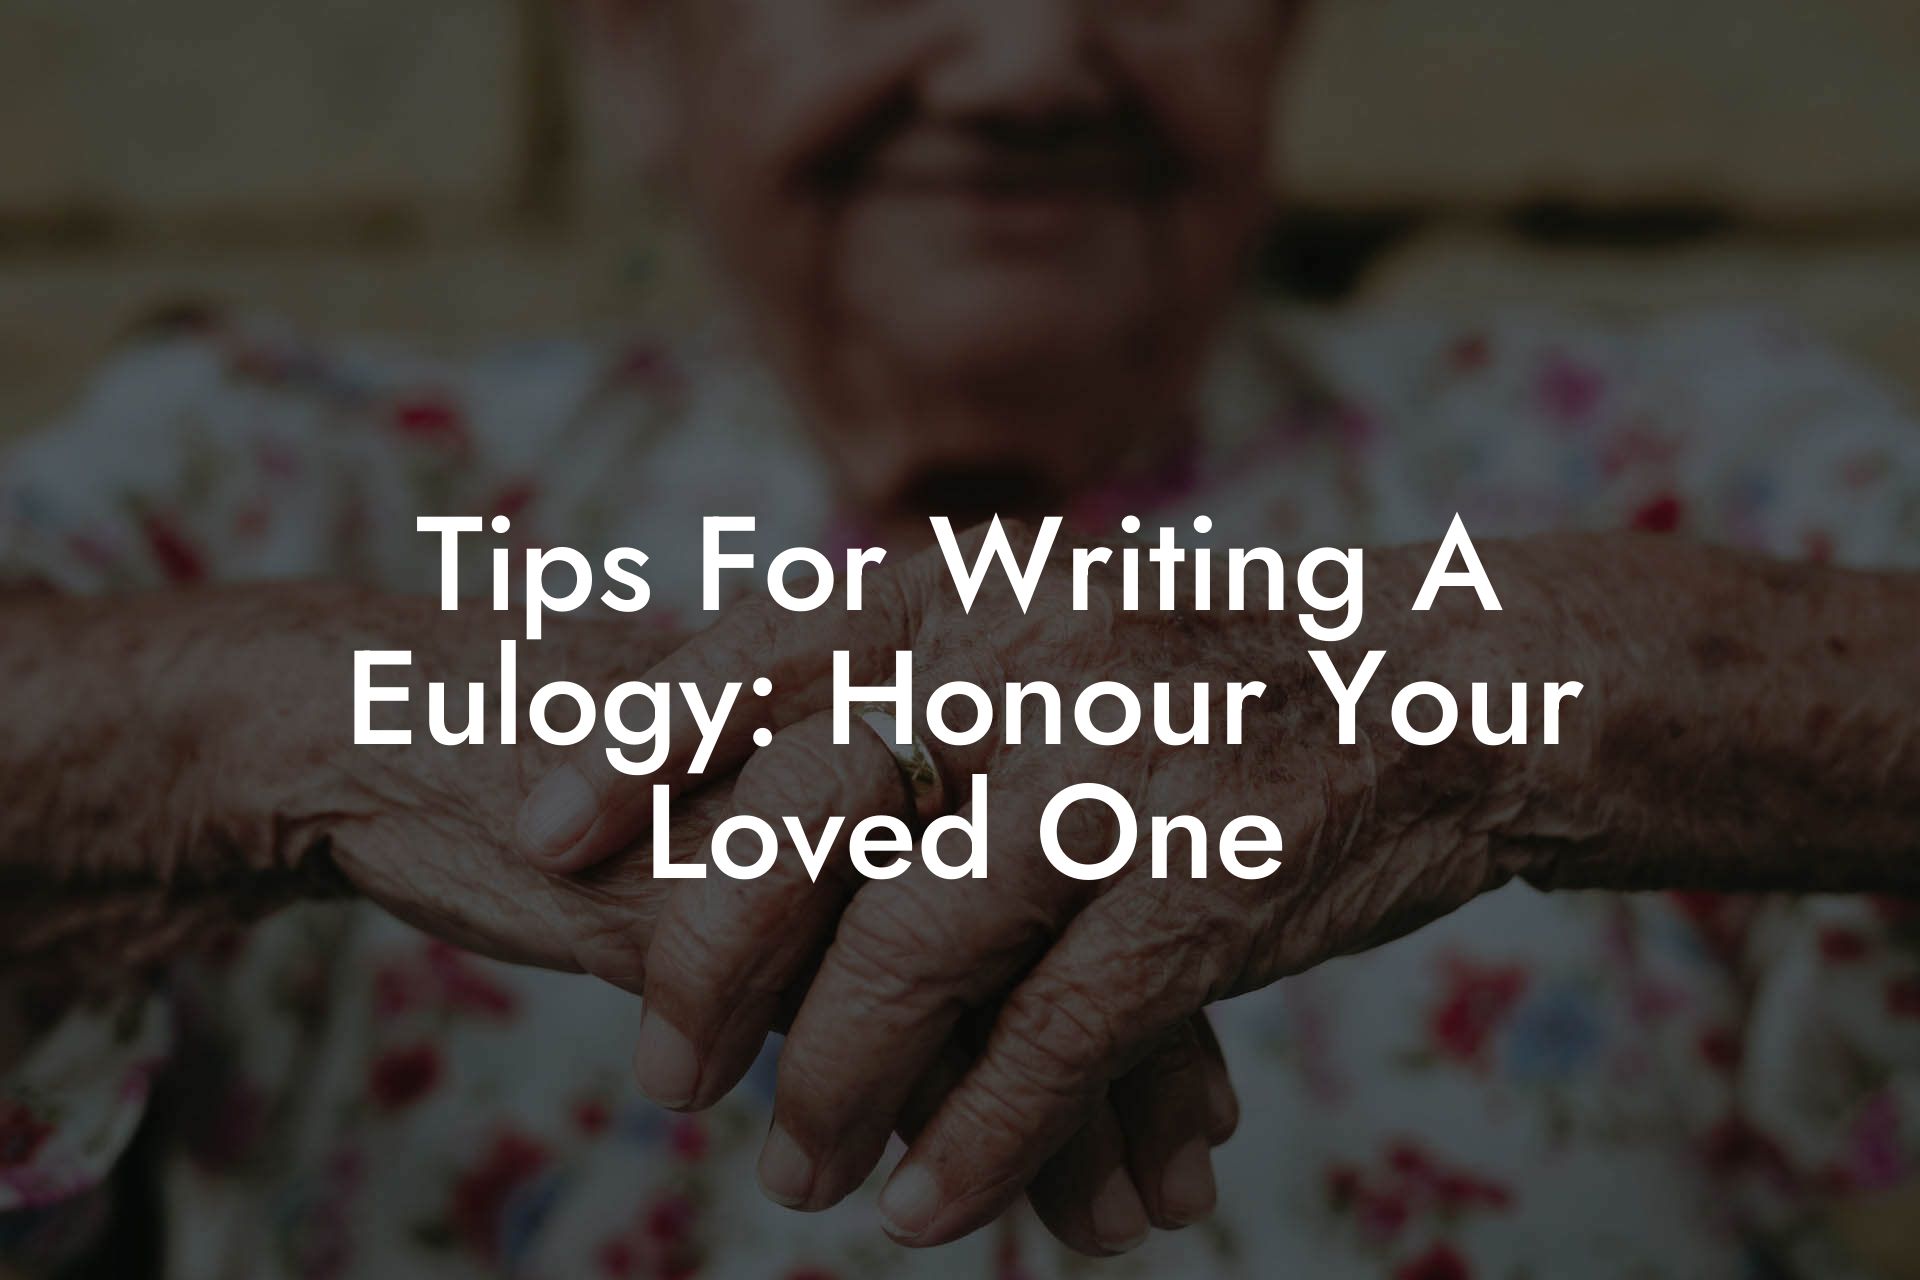 Tips For Writing A Eulogy: Honour Your Loved One